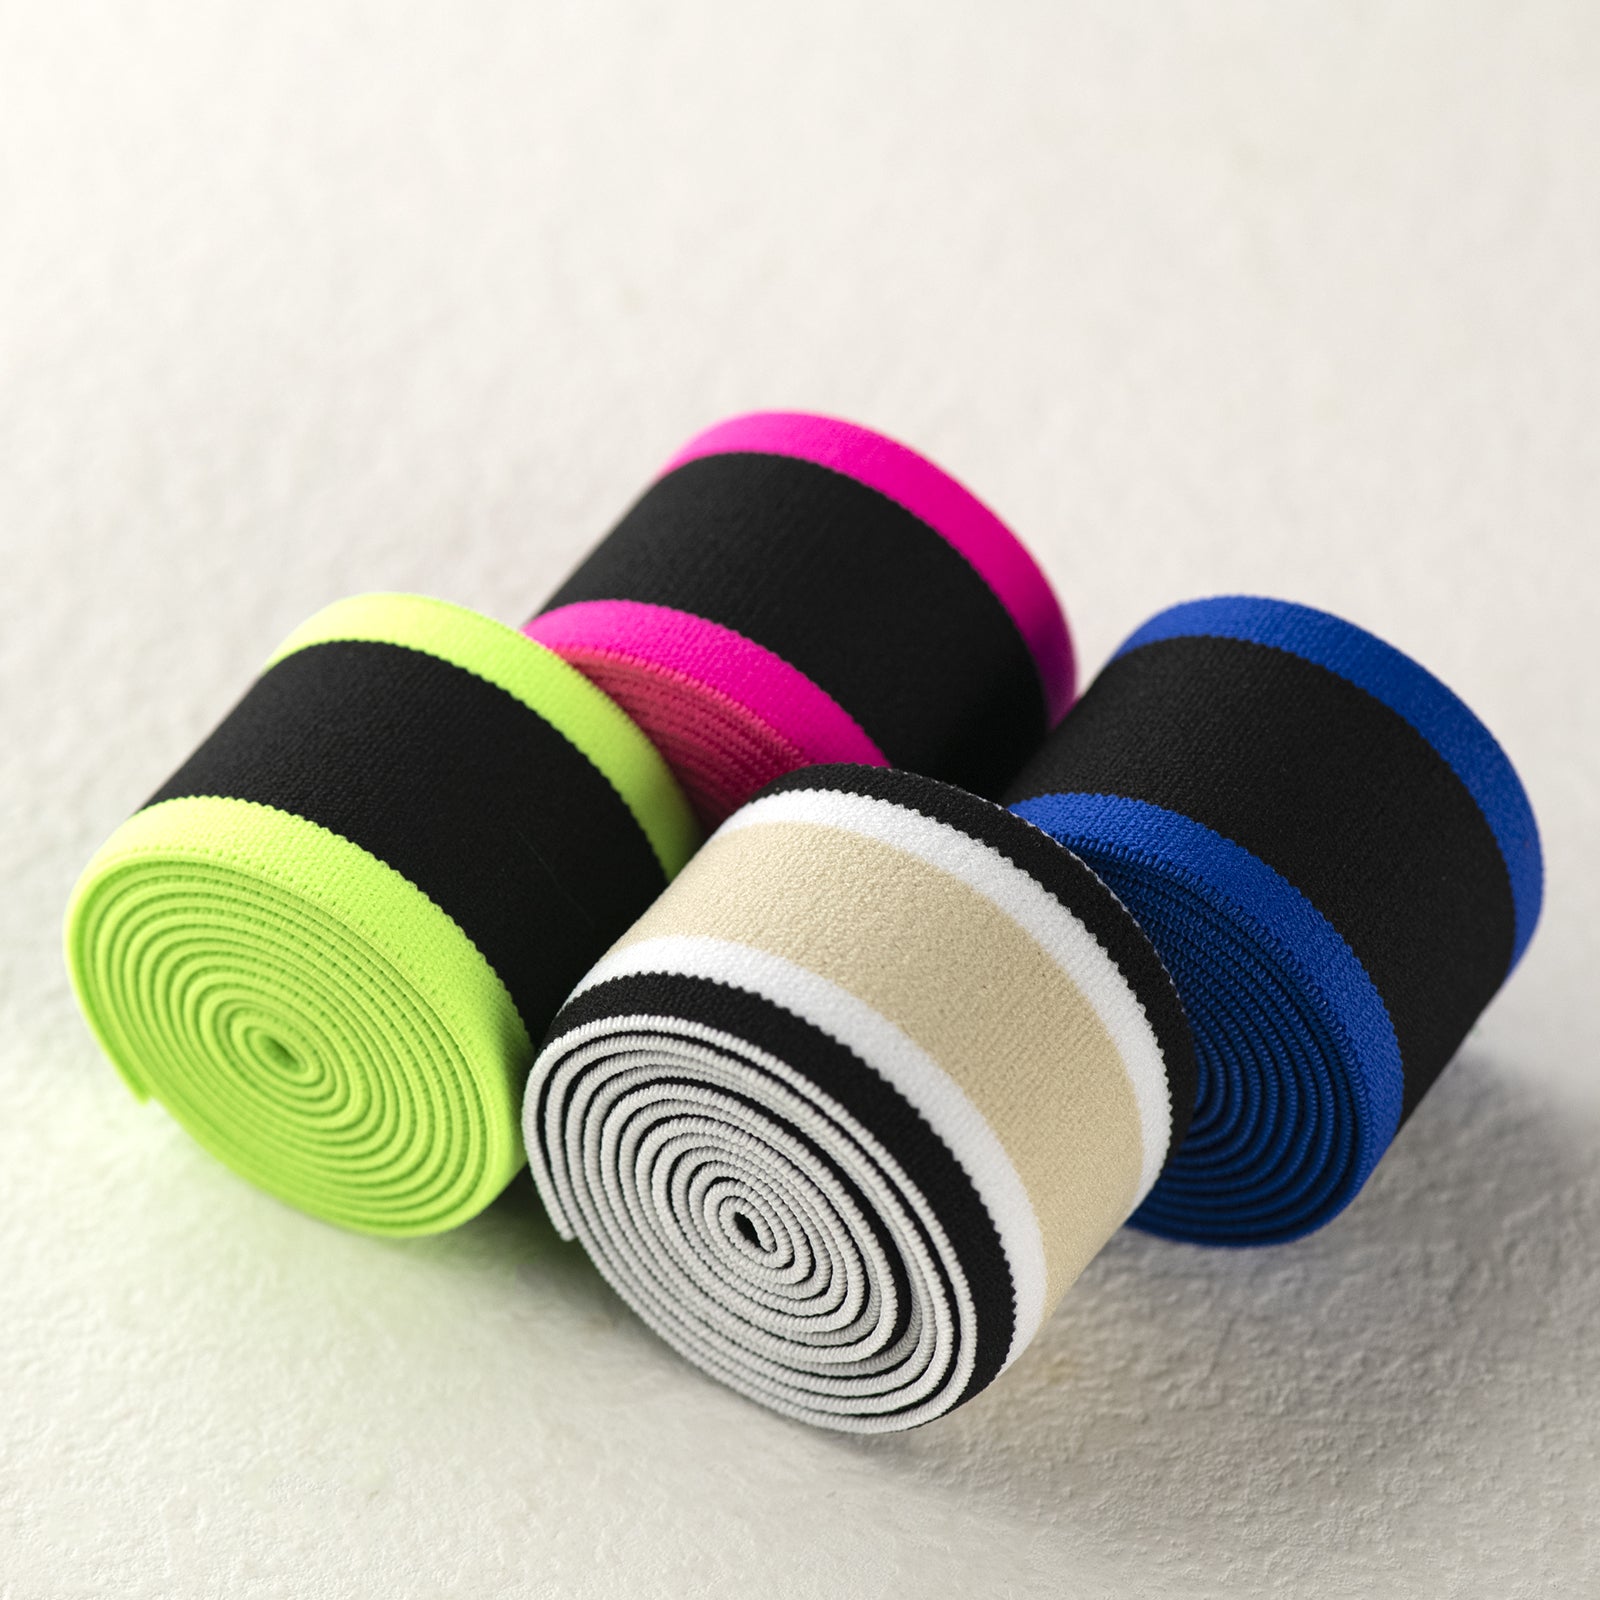 1.5 Inch 38mm Wide Elastic Band, Colored Double-side Twill Elastic